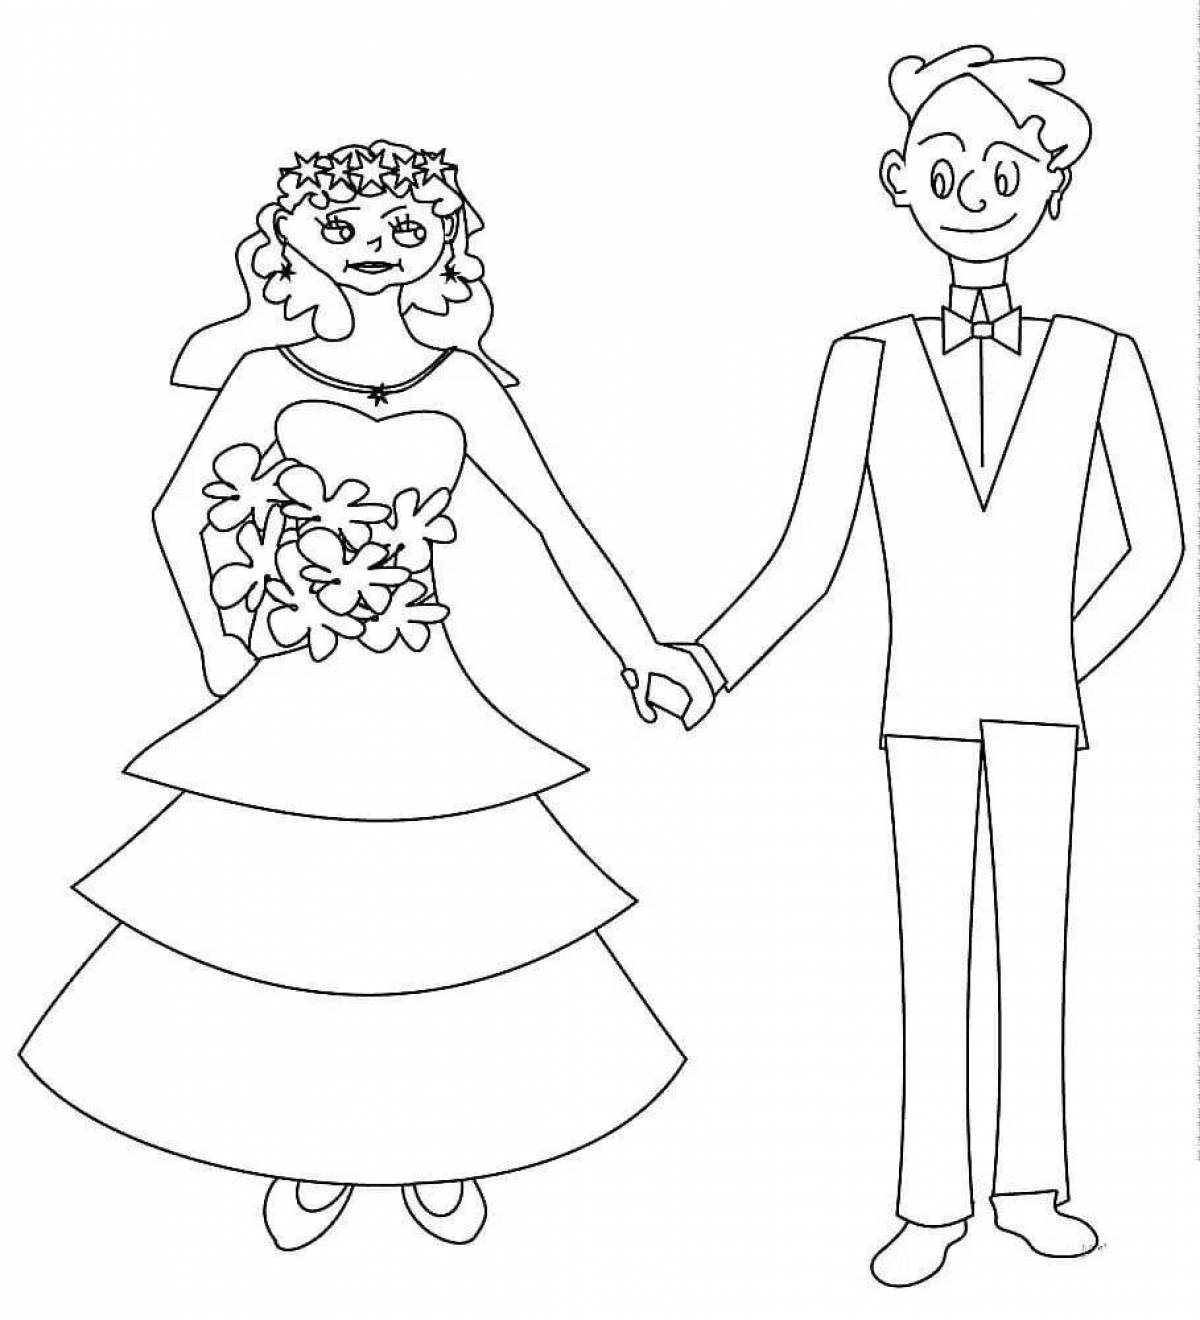 Cute bride and groom coloring pages